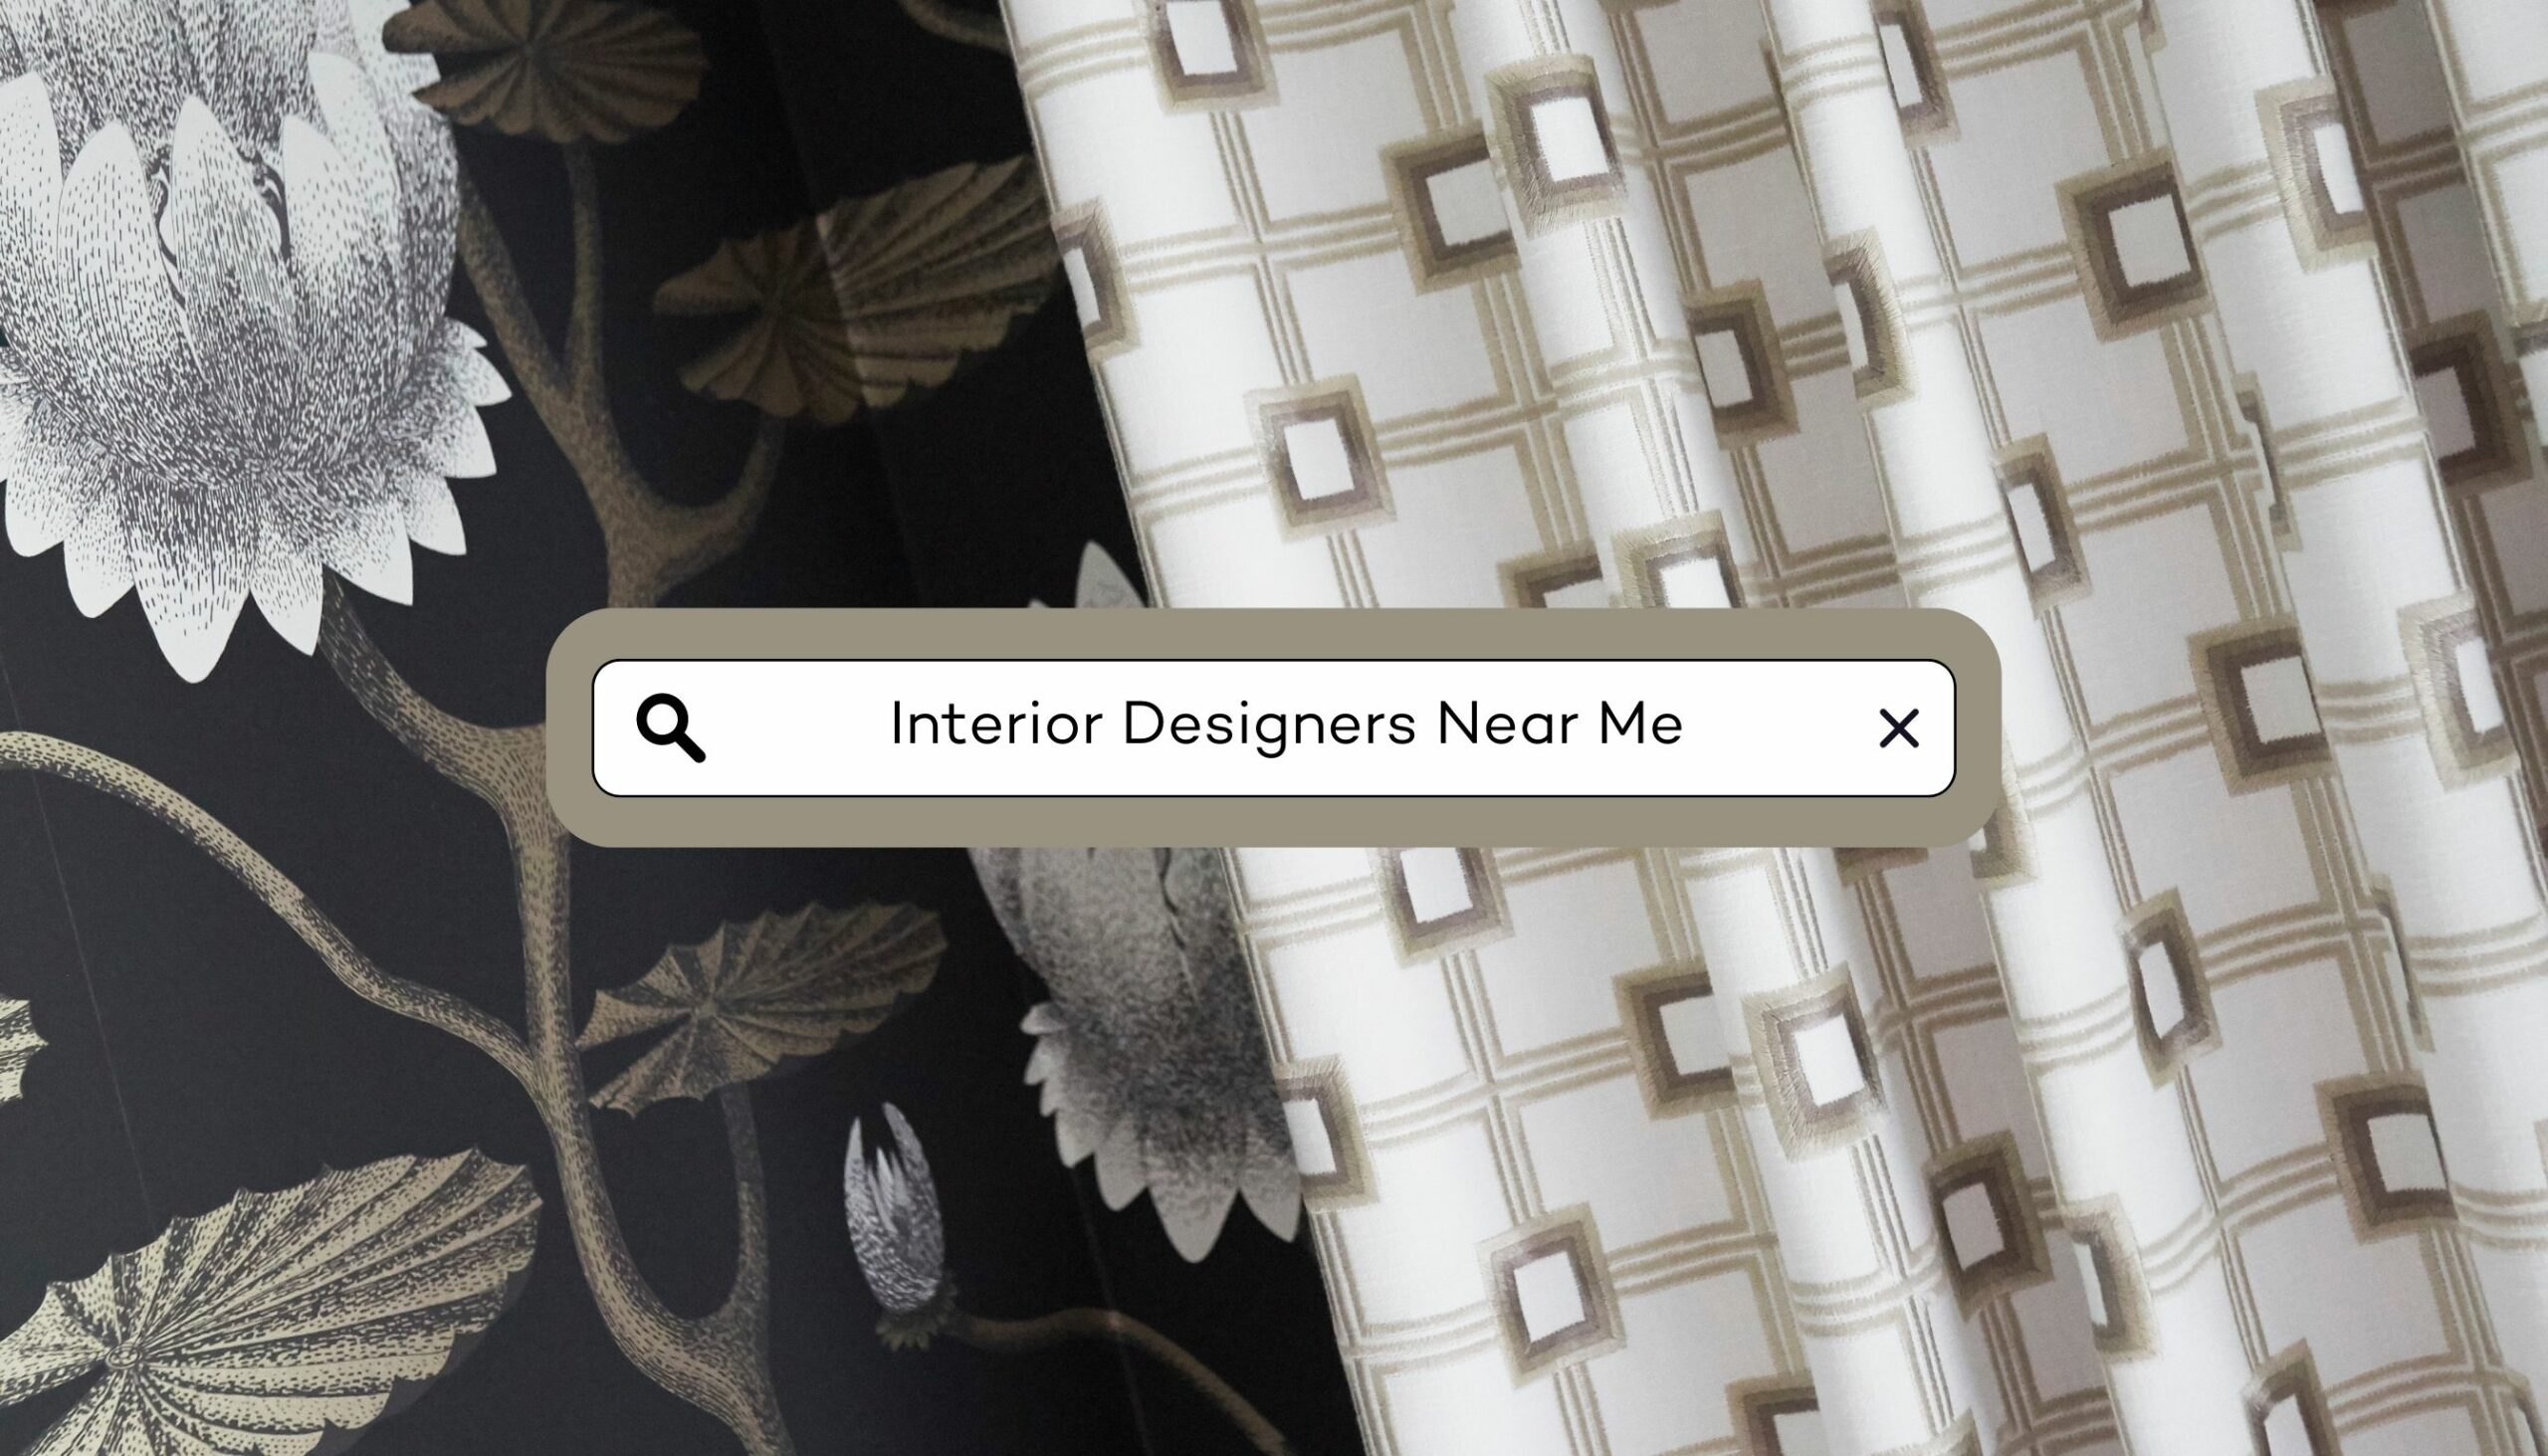 Interior Designers Near Me: Finding The Right Interior Designer For Your Project